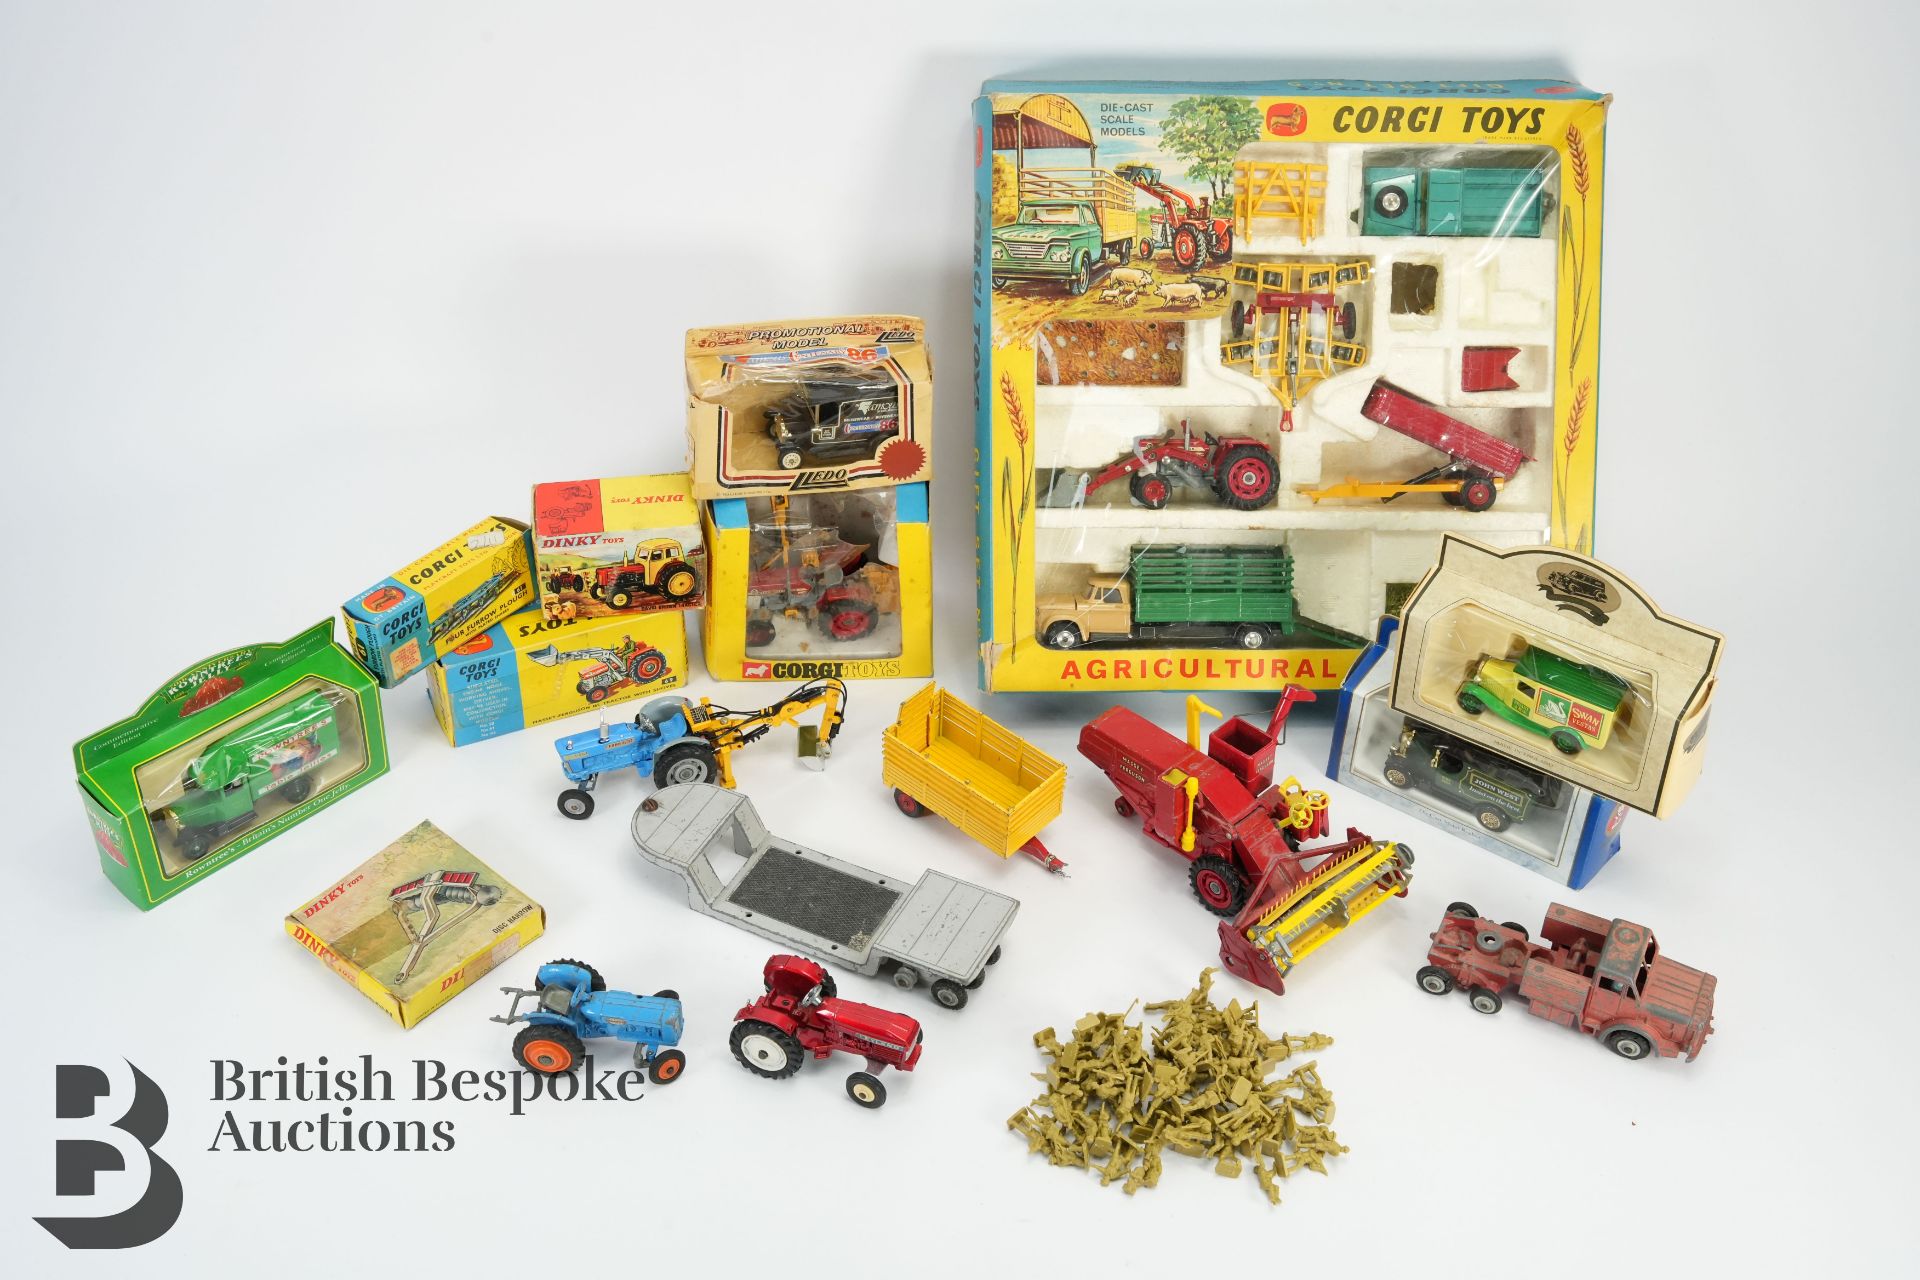 Dinky and Corgi Toys incl. Agricultural Gift Set No. 5